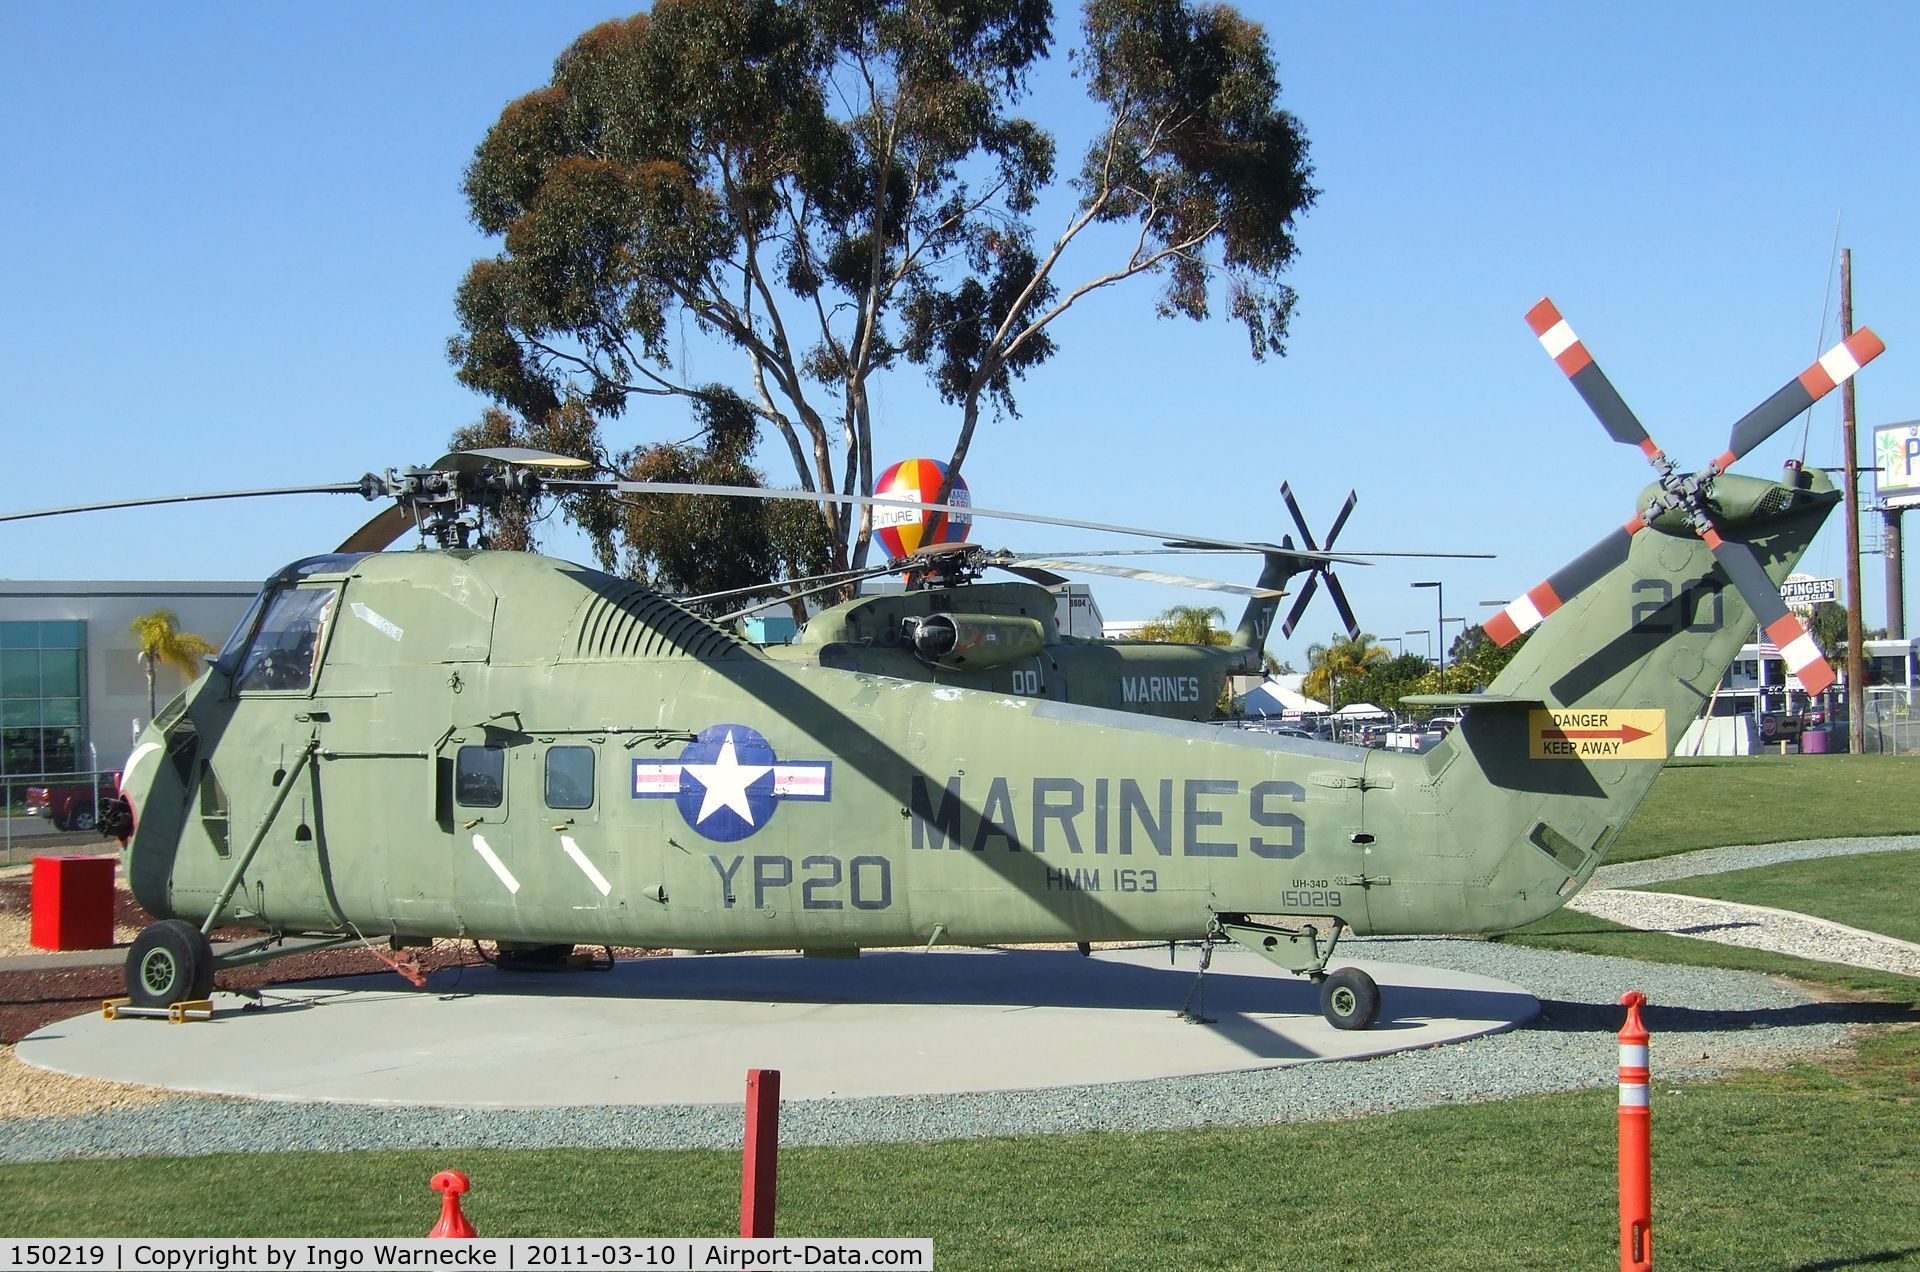 150219, Sikorsky UH-34D Seahorse C/N 58-1559, Sikorsky UH-34D Seahorse at the Flying Leatherneck Aviation Museum, Miramar CA